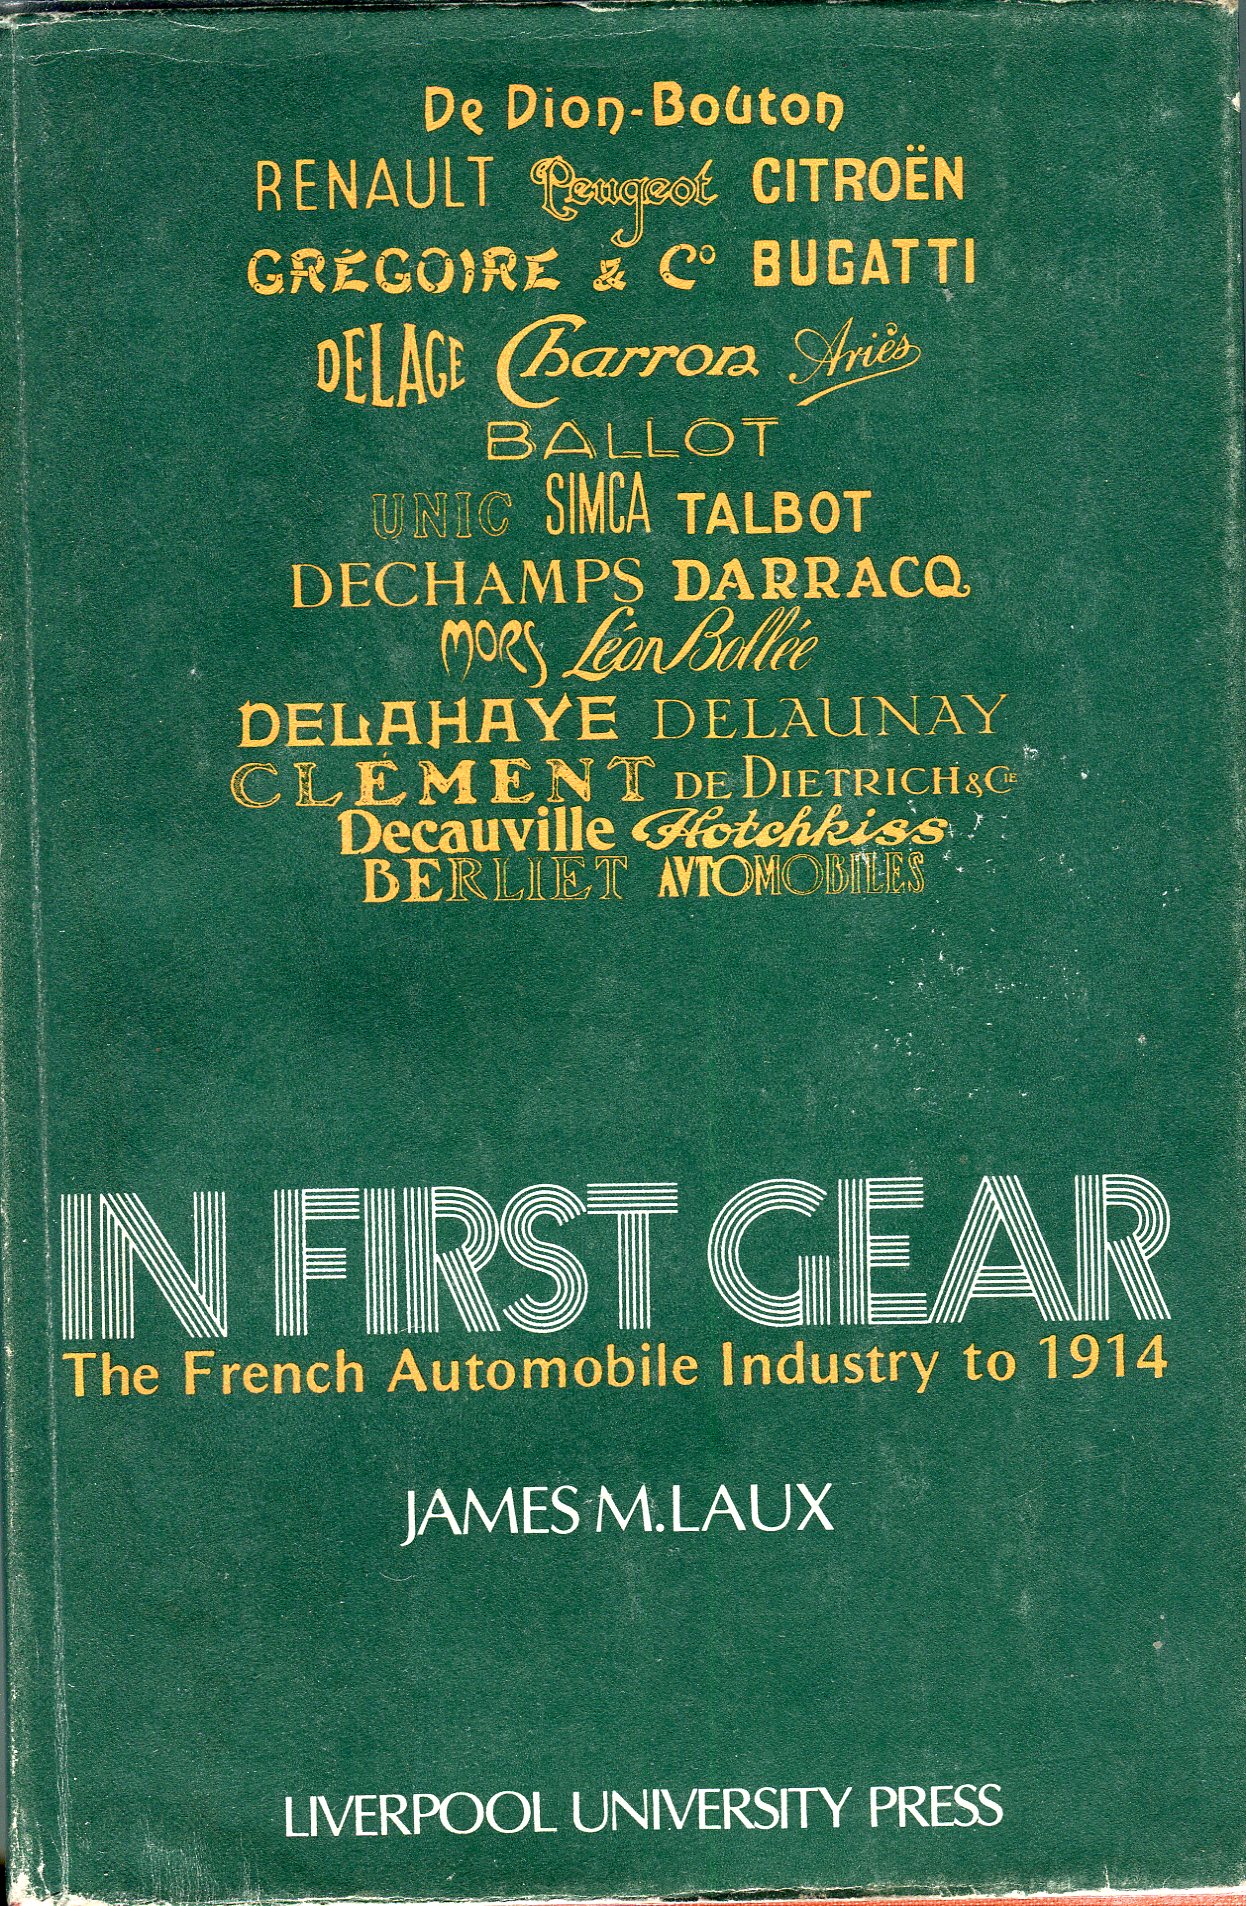 In First Gear, the French Automobile Industry to 1914 - Laux, James M.